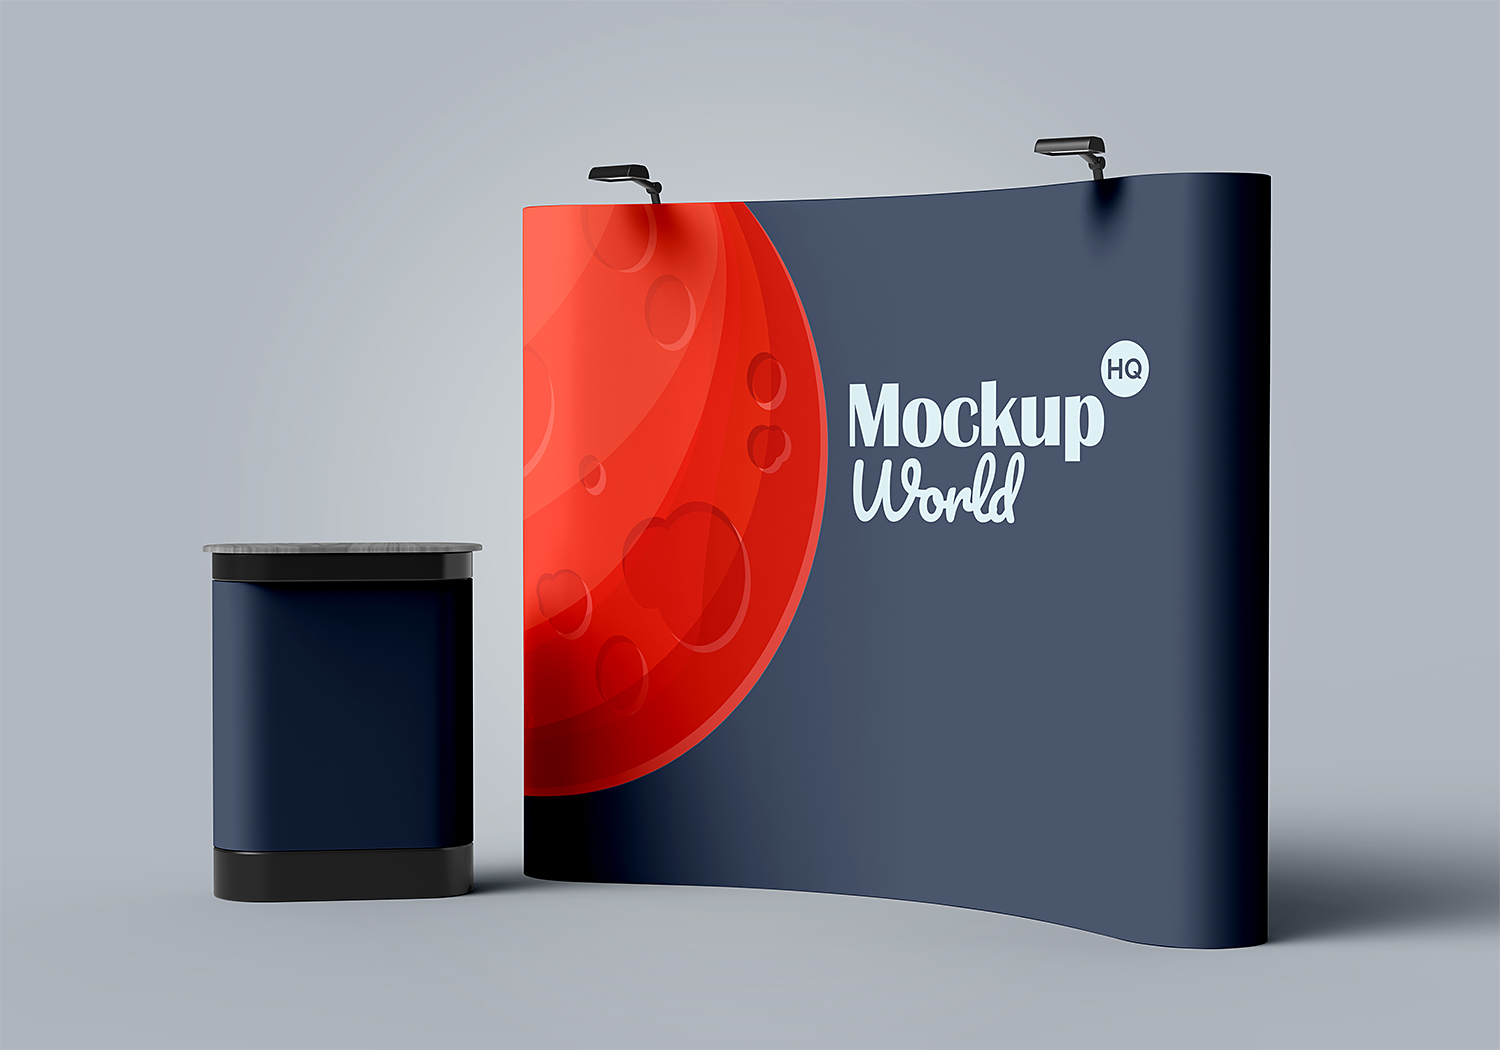 Trade Show Exhibition Booth Stand Mockup